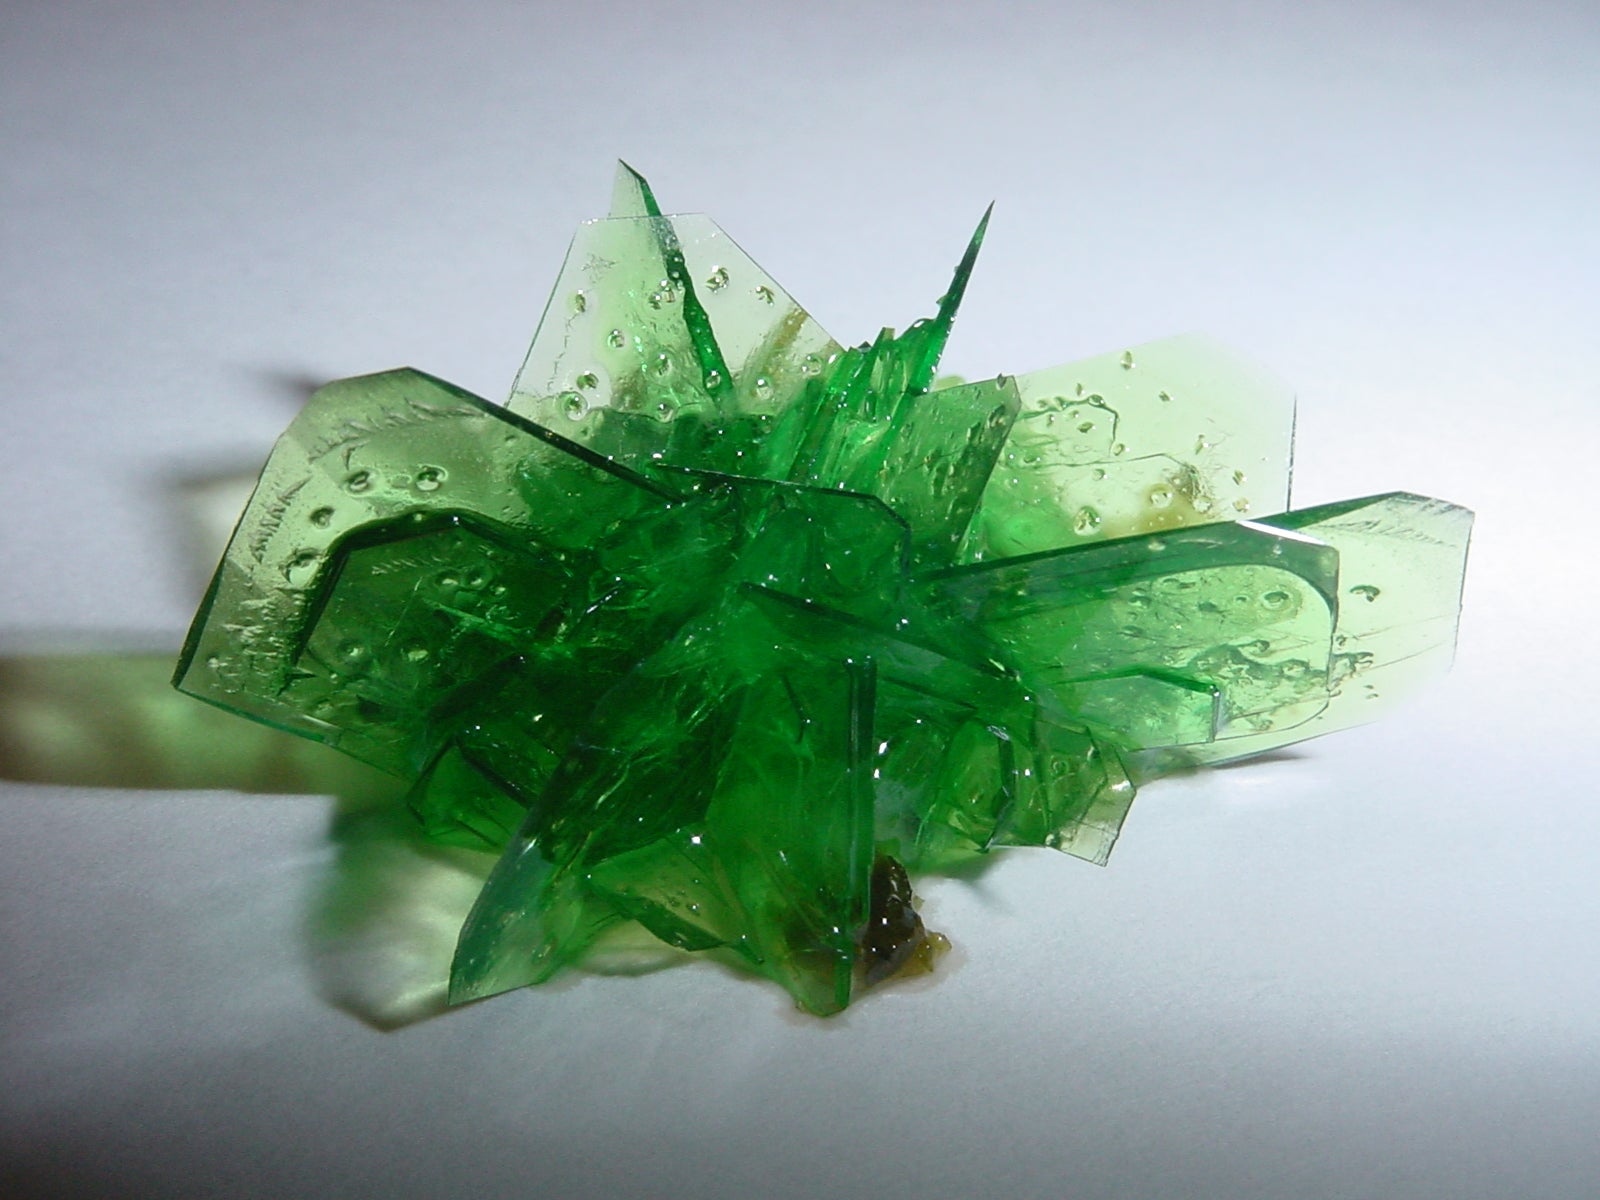 potassium trioxolatoferrate (III) trihydrate which appears as a green crystal